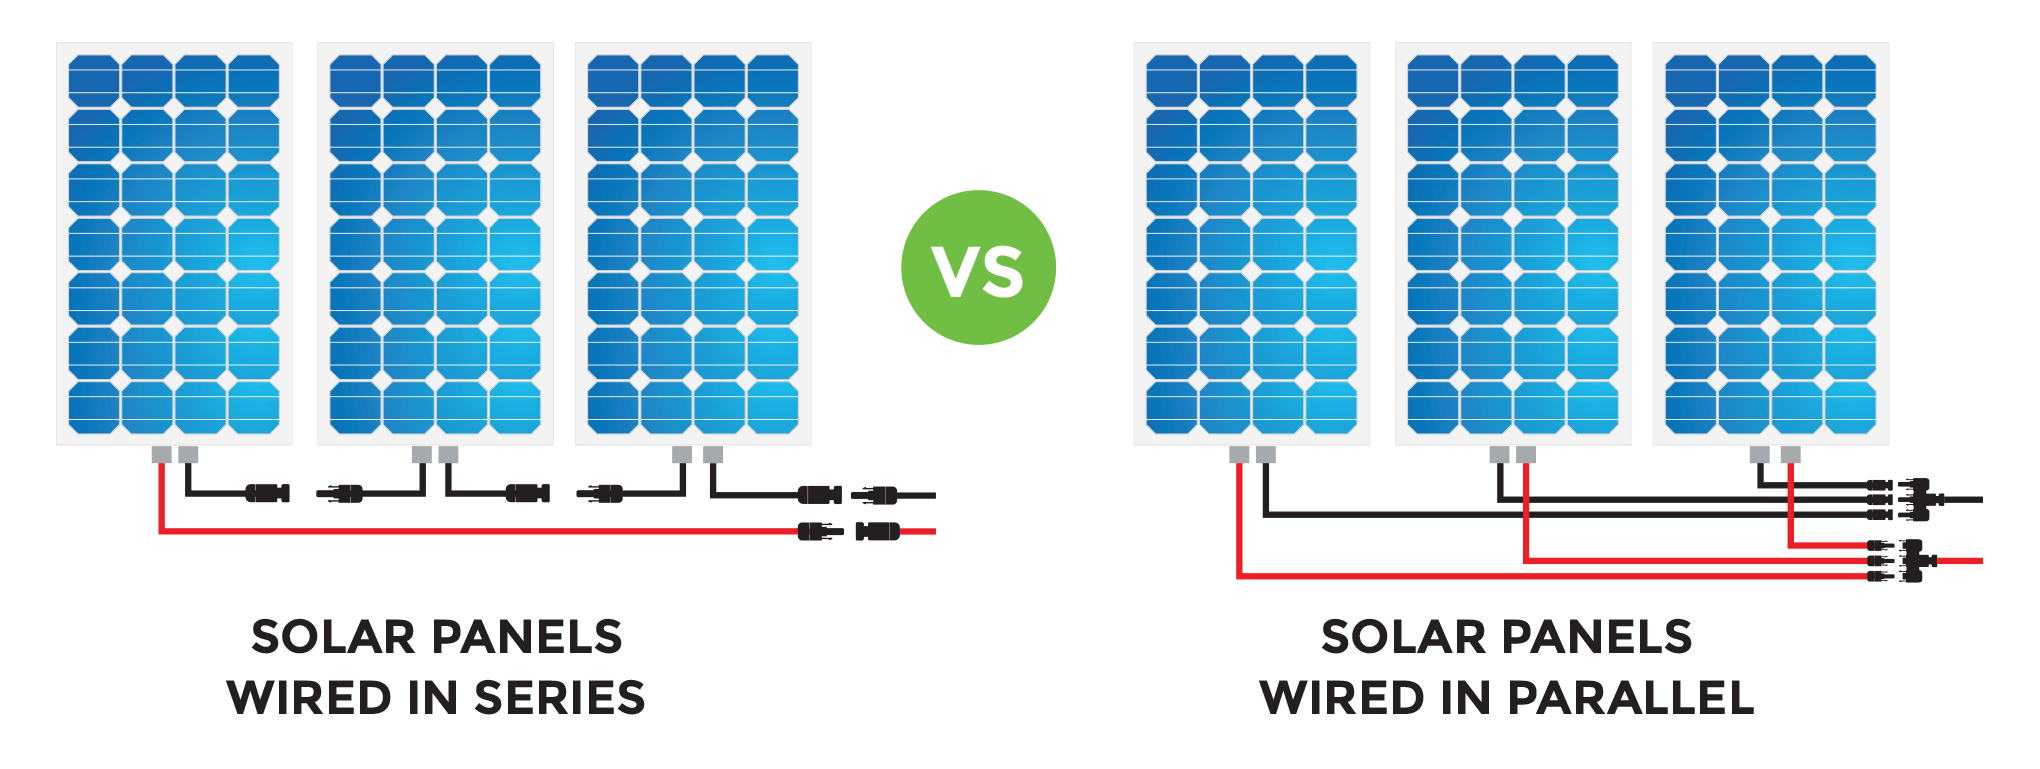 wiring solar panels in series vs parallel and how that works with a solar charge controller